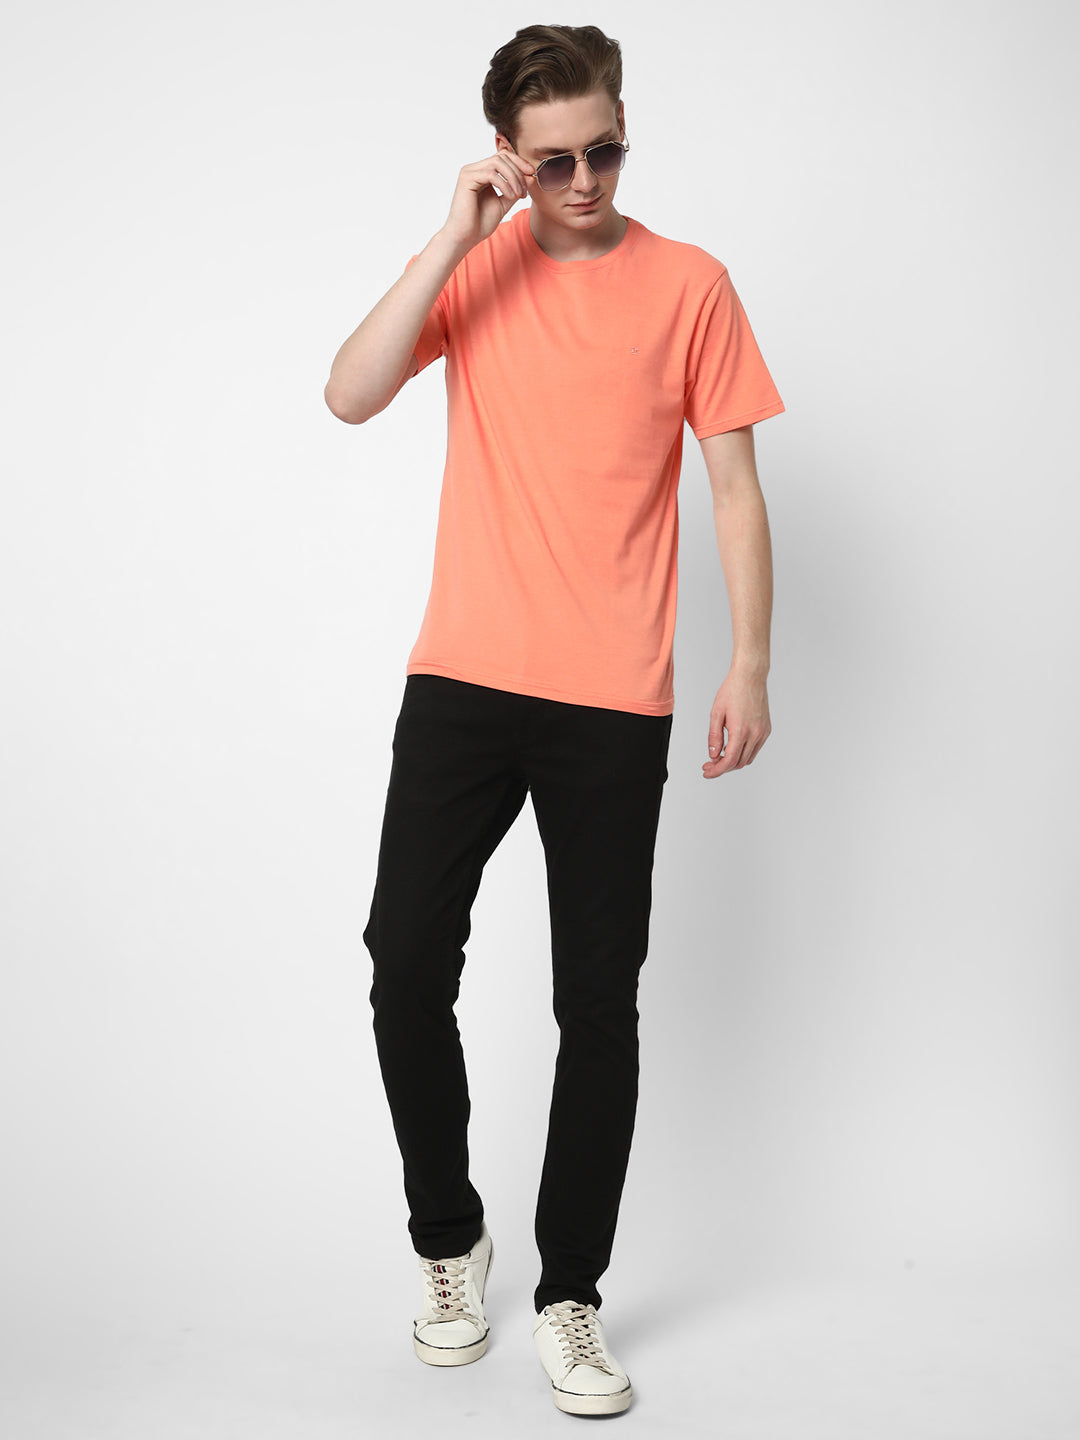 Cotstyle Cotton Fabrics Round Neck Short Length Plain Half Sleeve Casual & Daily Wear Men's T-Shirts -  Pack of 1 - Fusion Coral